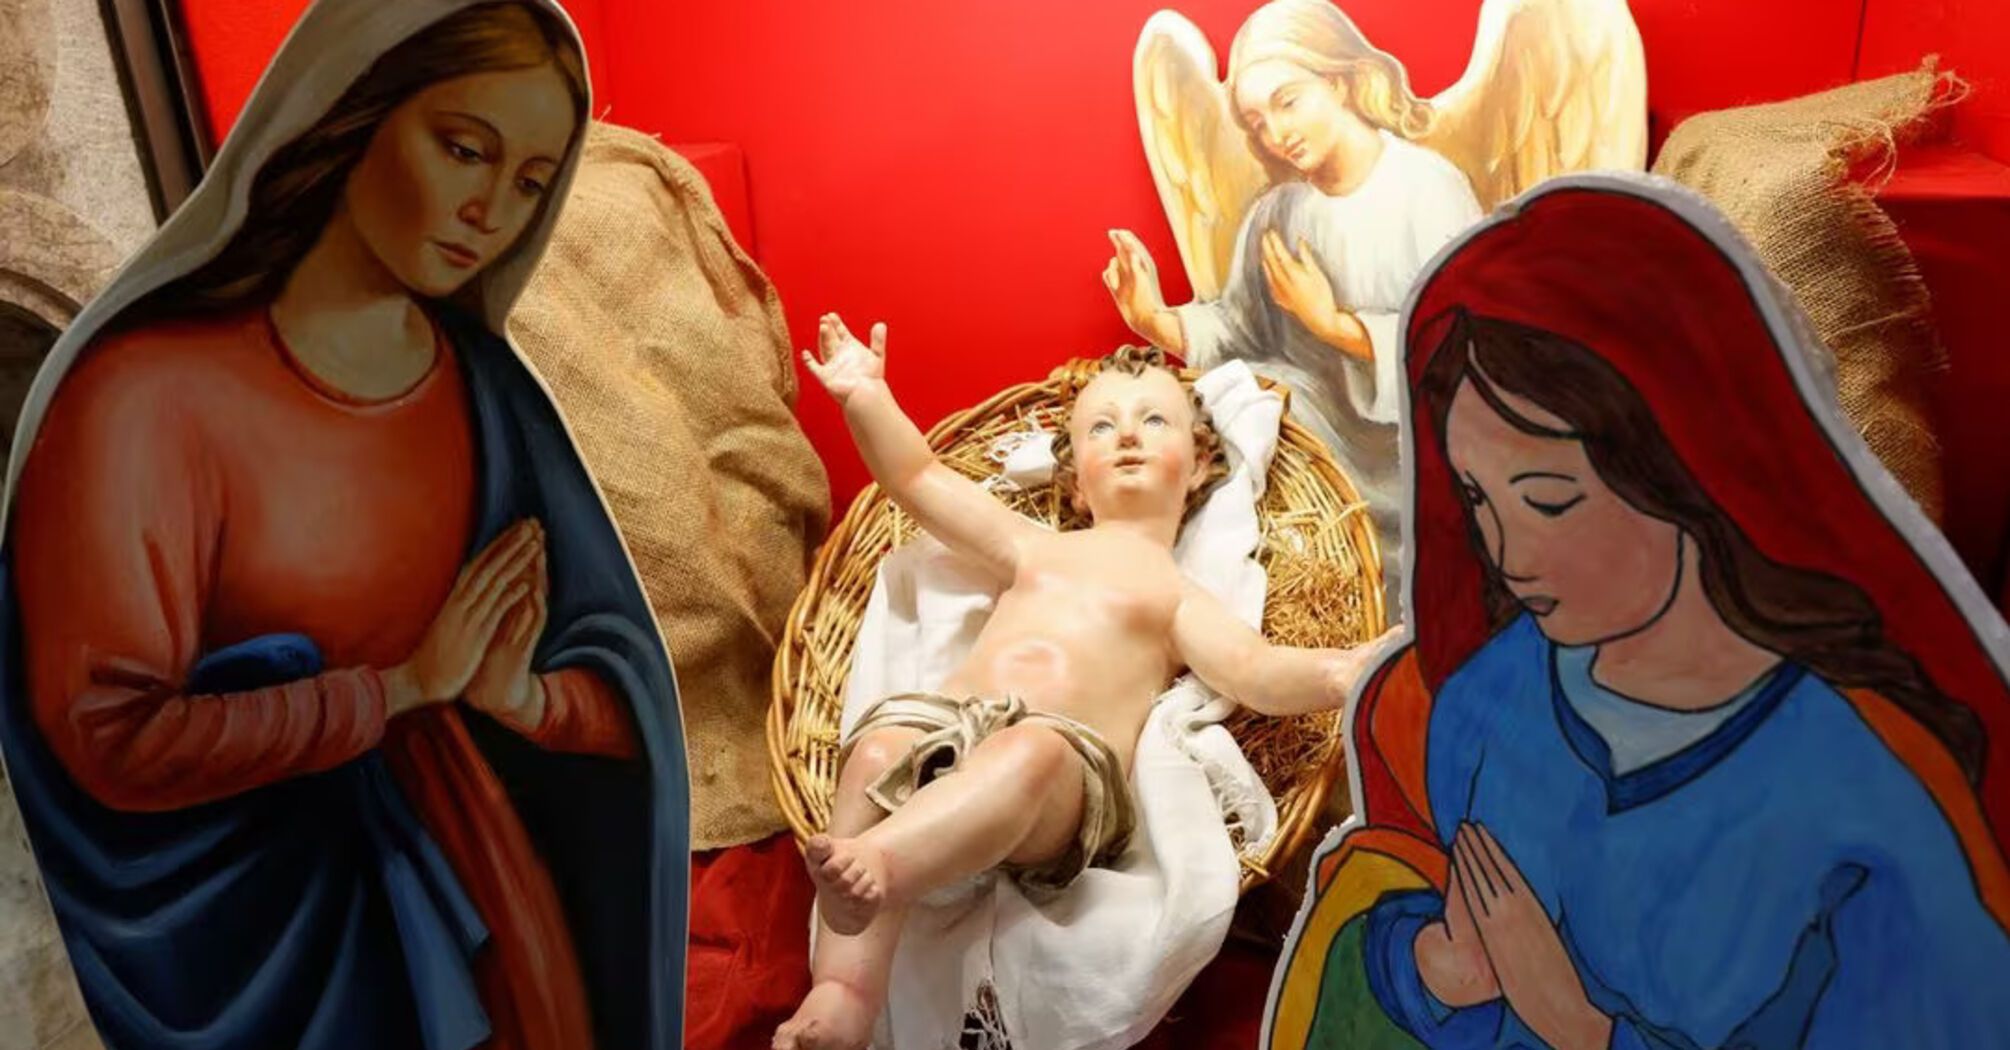 Scandal erupts in Italy over same-sex nativity scene with two mothers of Jesus